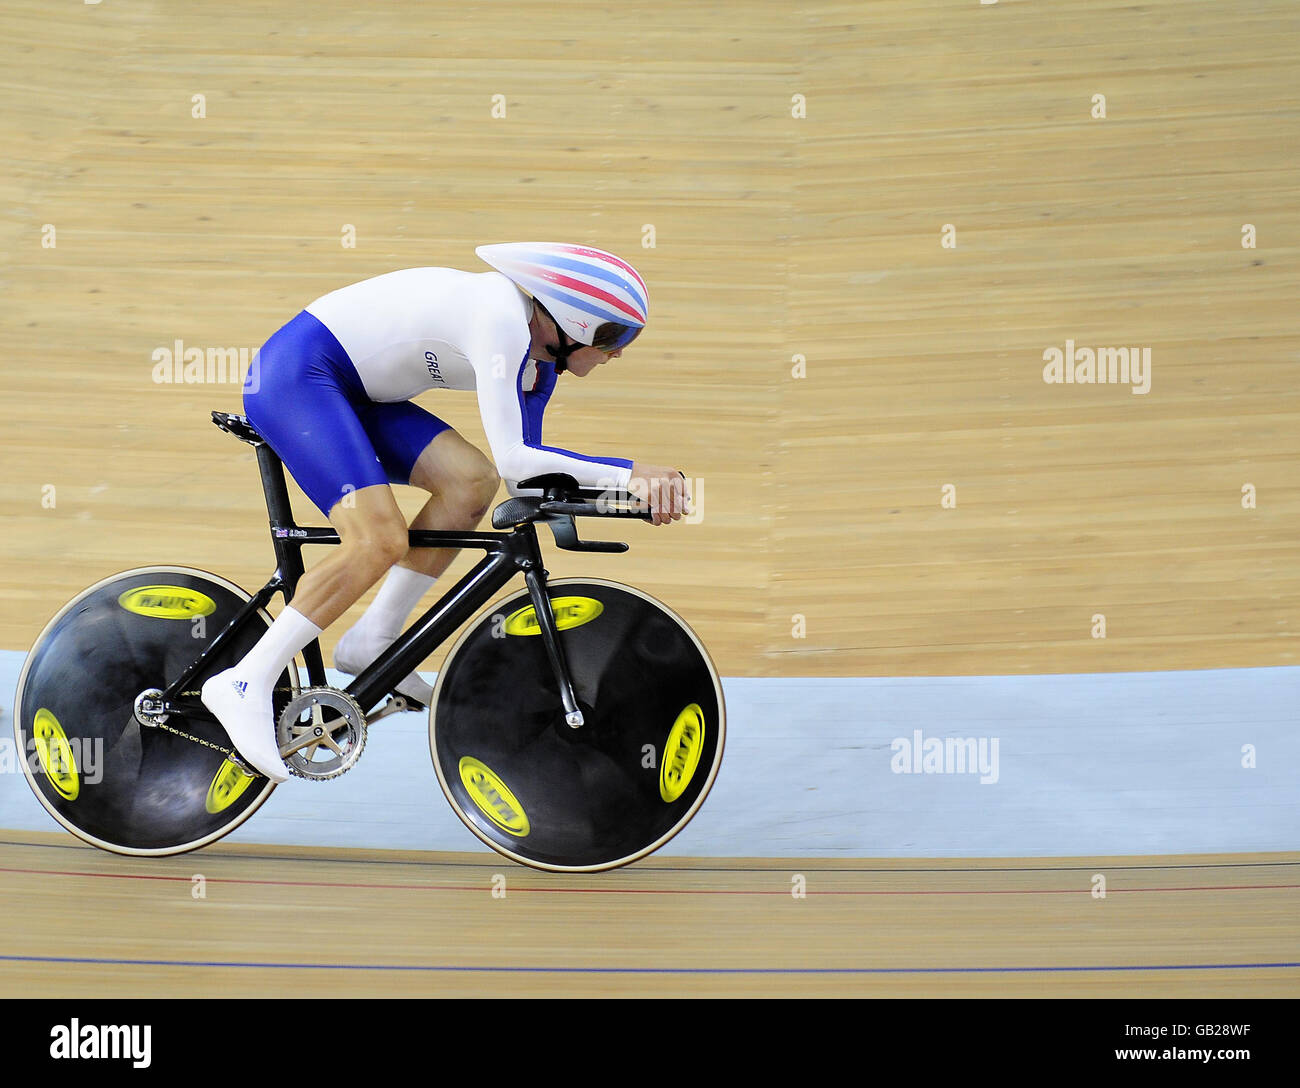 Great Britain's Steve Burke during his heat in the Men's Individual Pursuit at the Laoshan Velodrome during the 2008 Beijing Olympic Games in China. Stock Photo